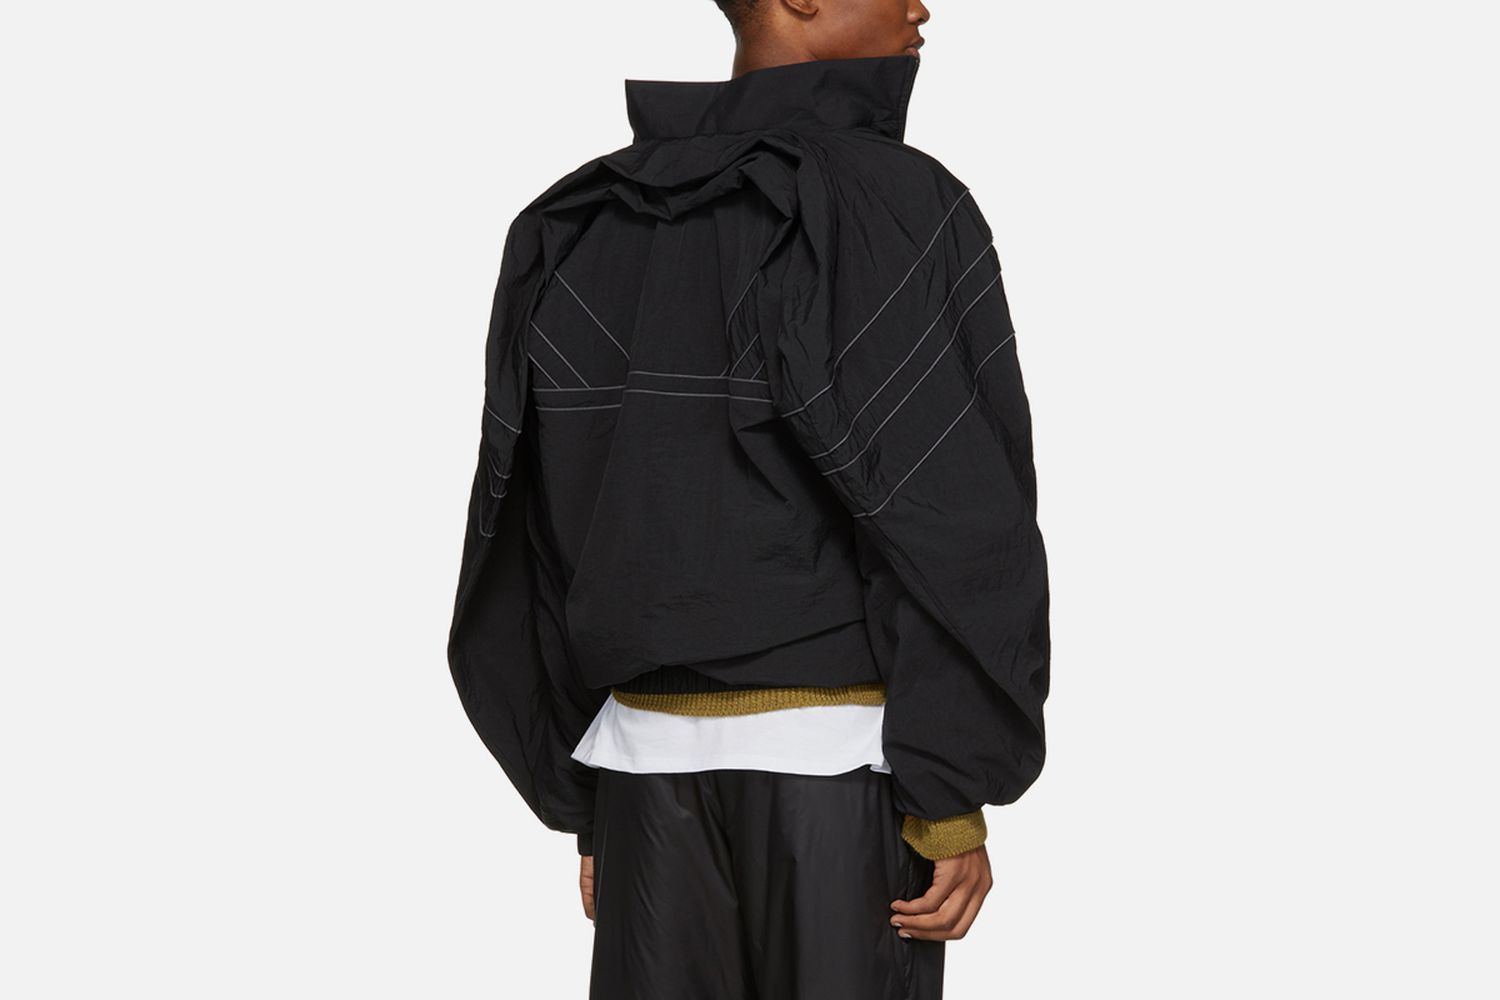 Clipped Shoulders Jacket